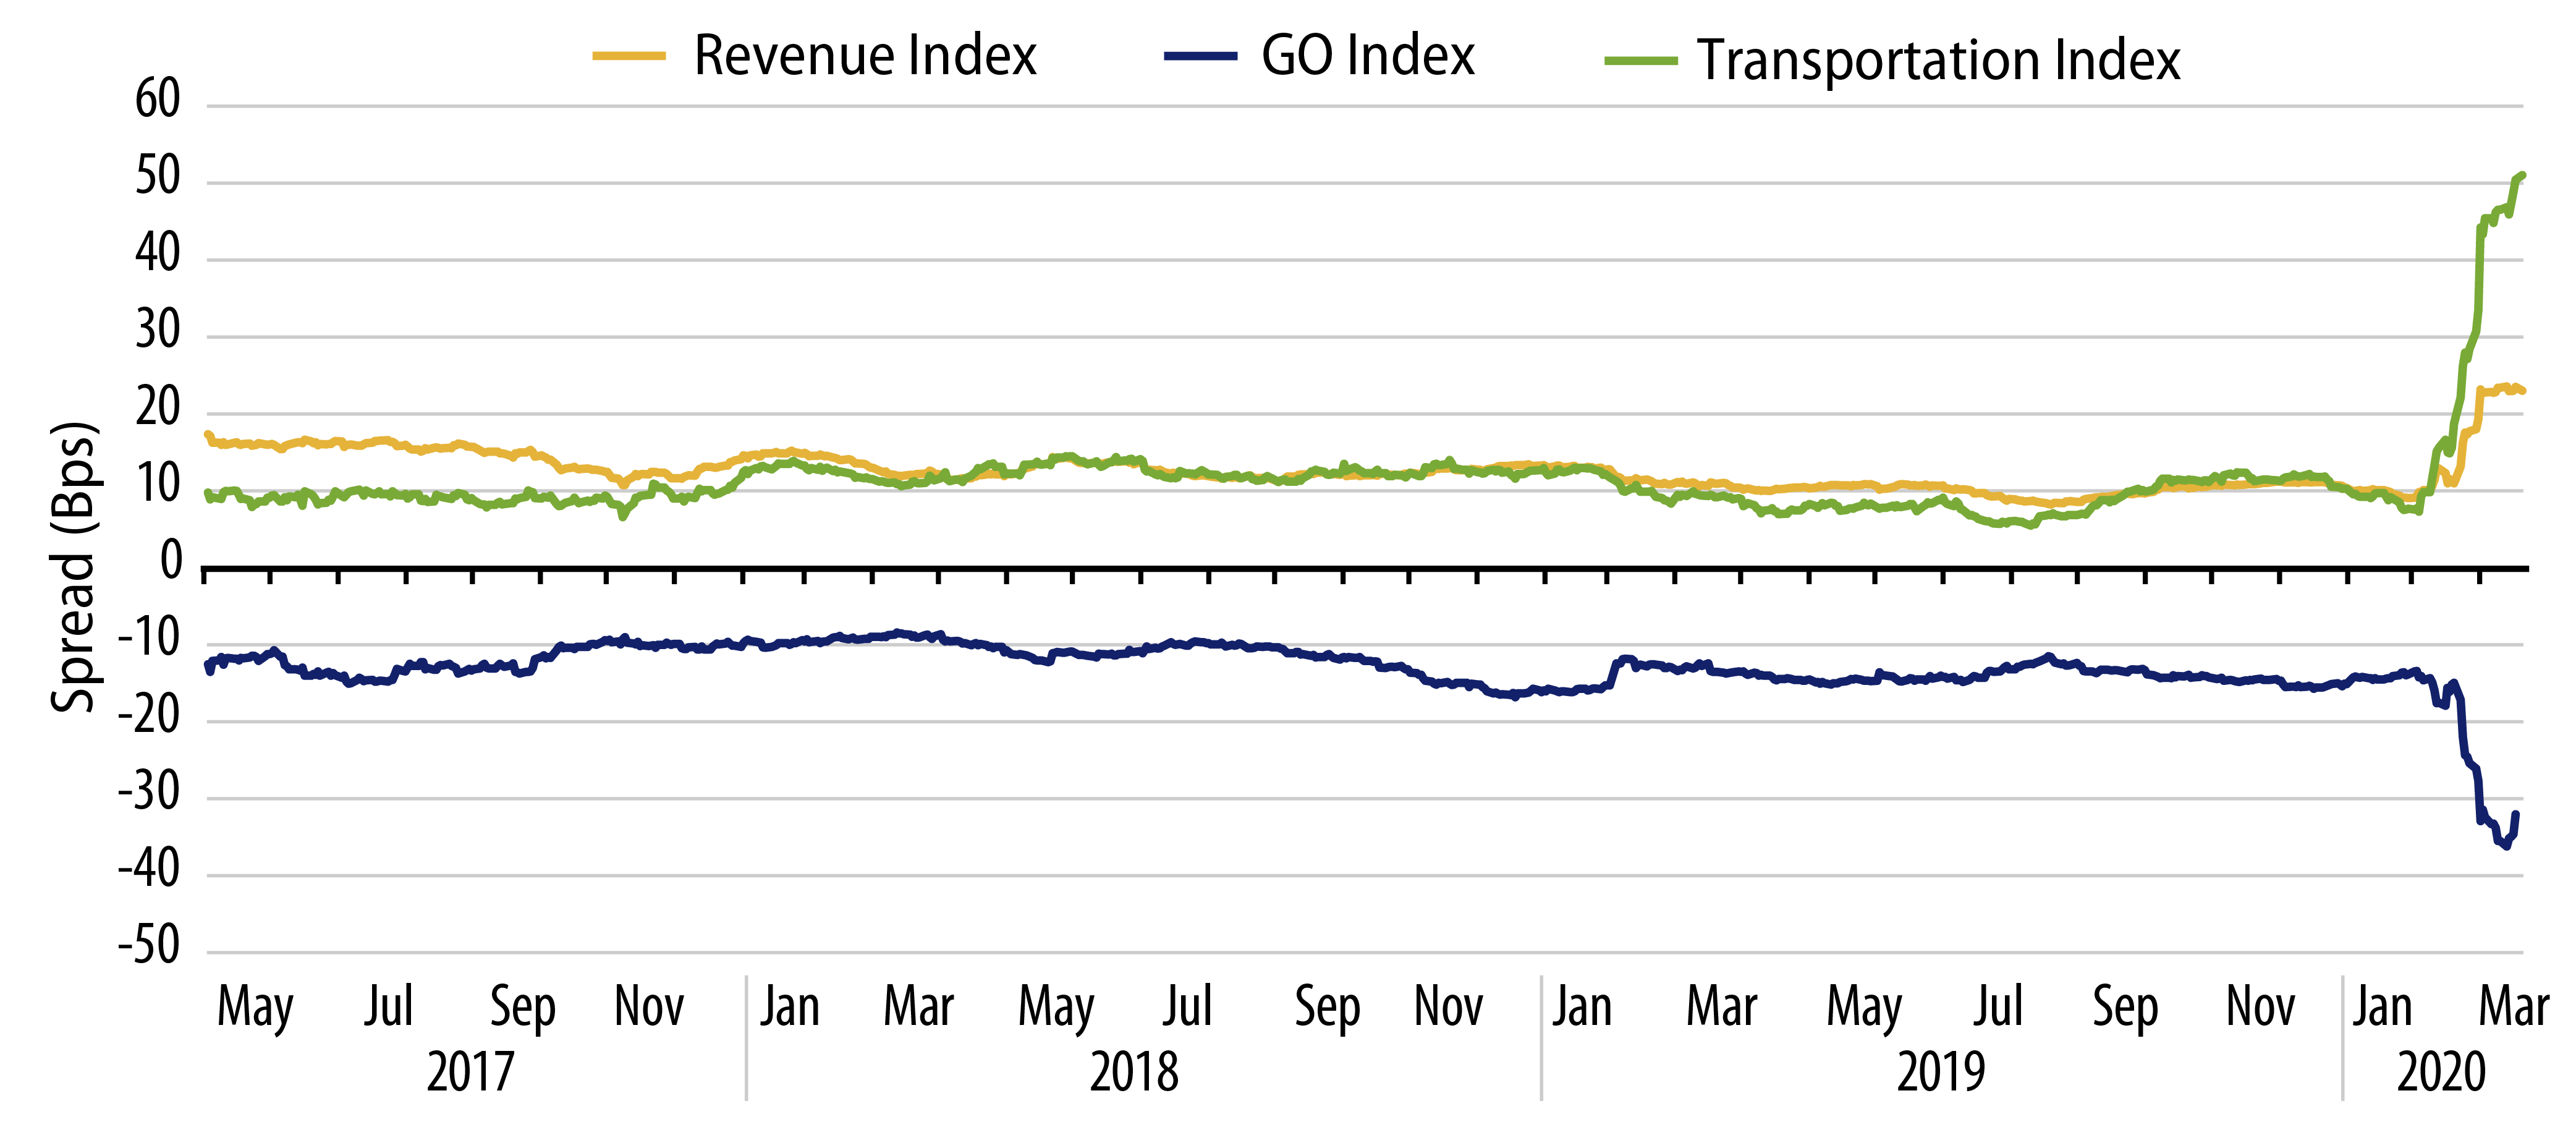 Explore Investment-Grade Transportation and Revenue Sector Spreads.